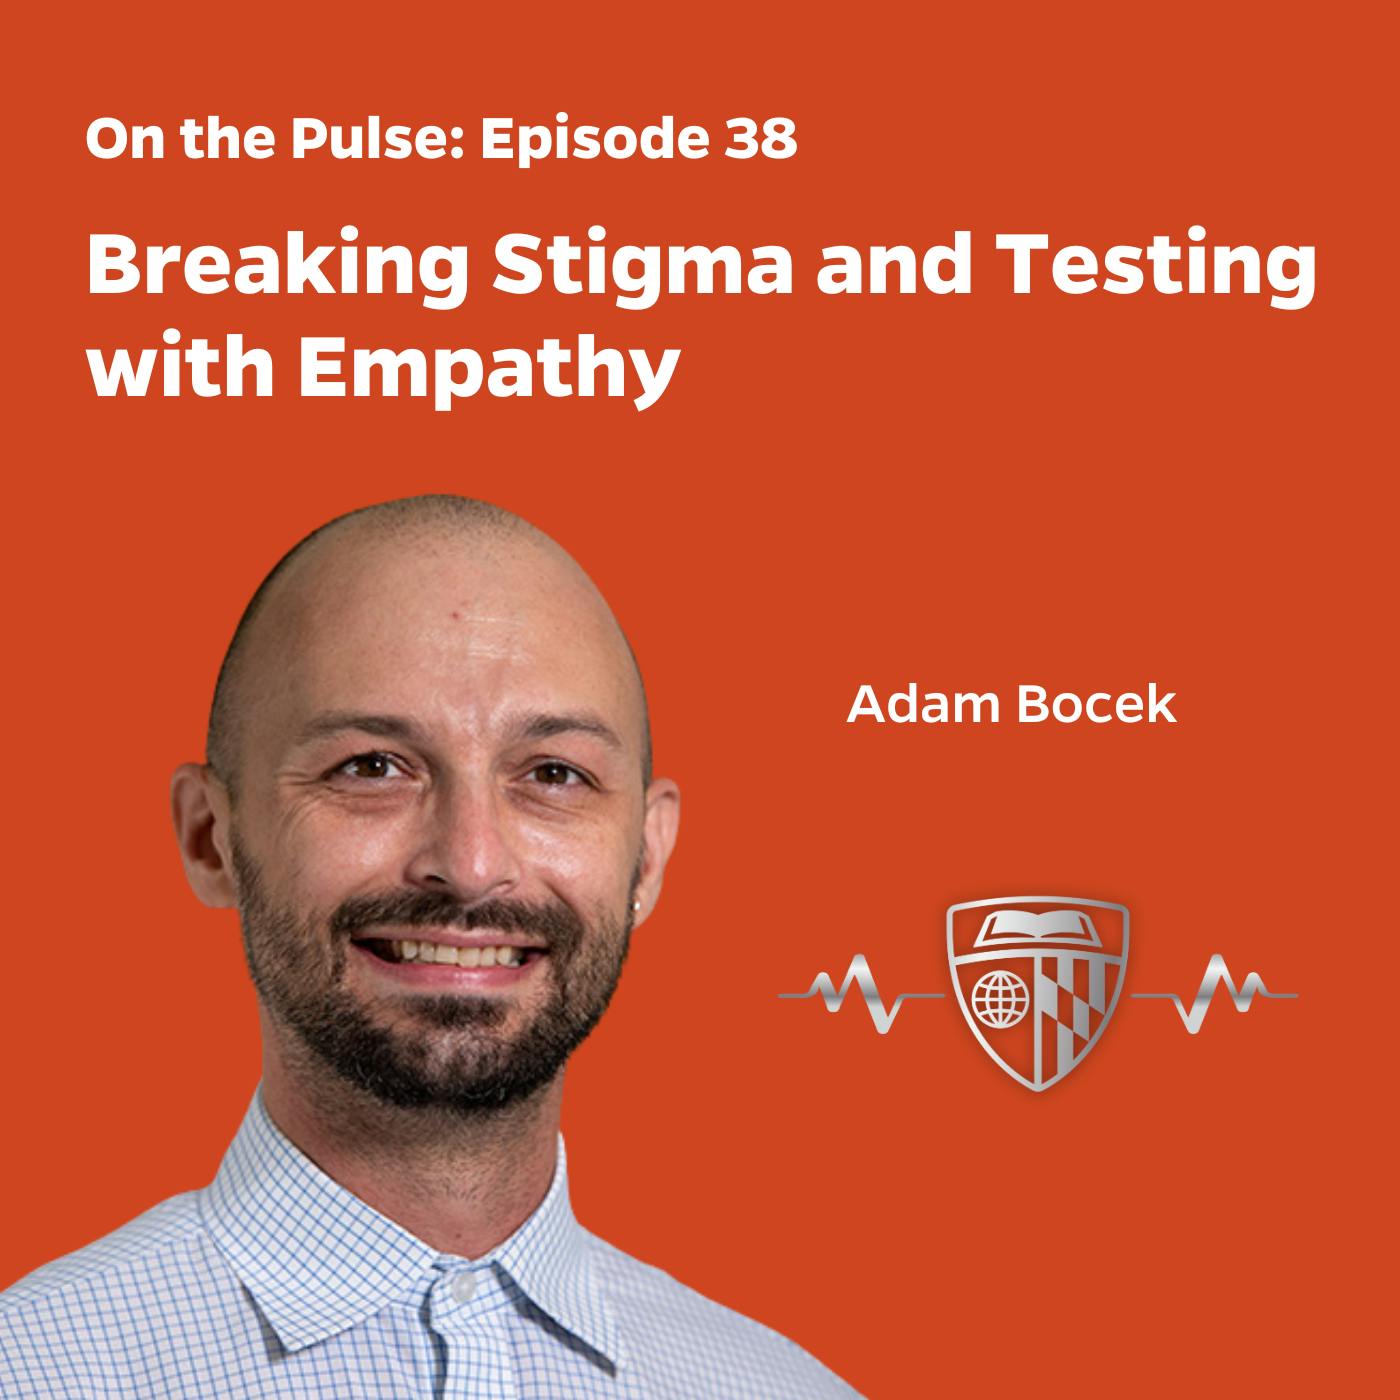 Episode 38: Breaking Stigma and Testing with Empathy